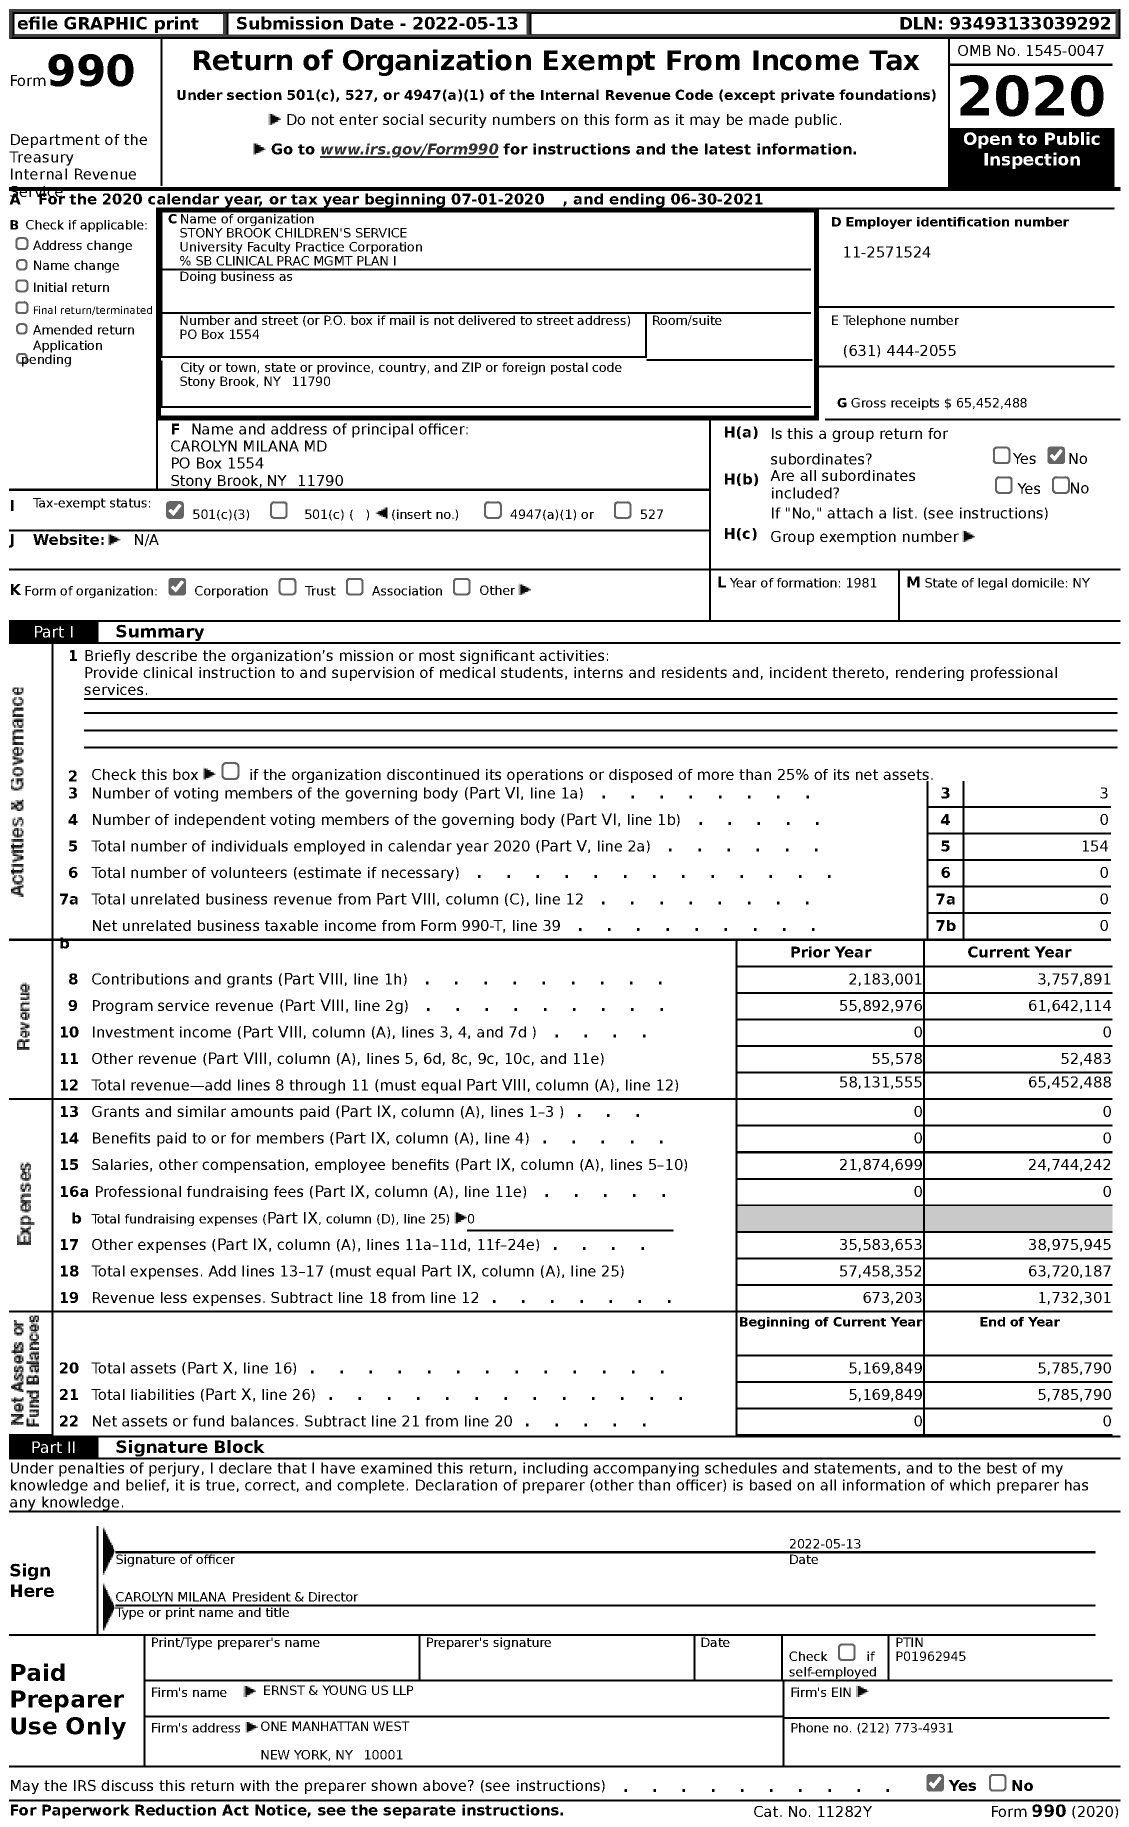 Image of first page of 2020 Form 990 for Stony Brook Children's Service University Faculty Practice Corporation